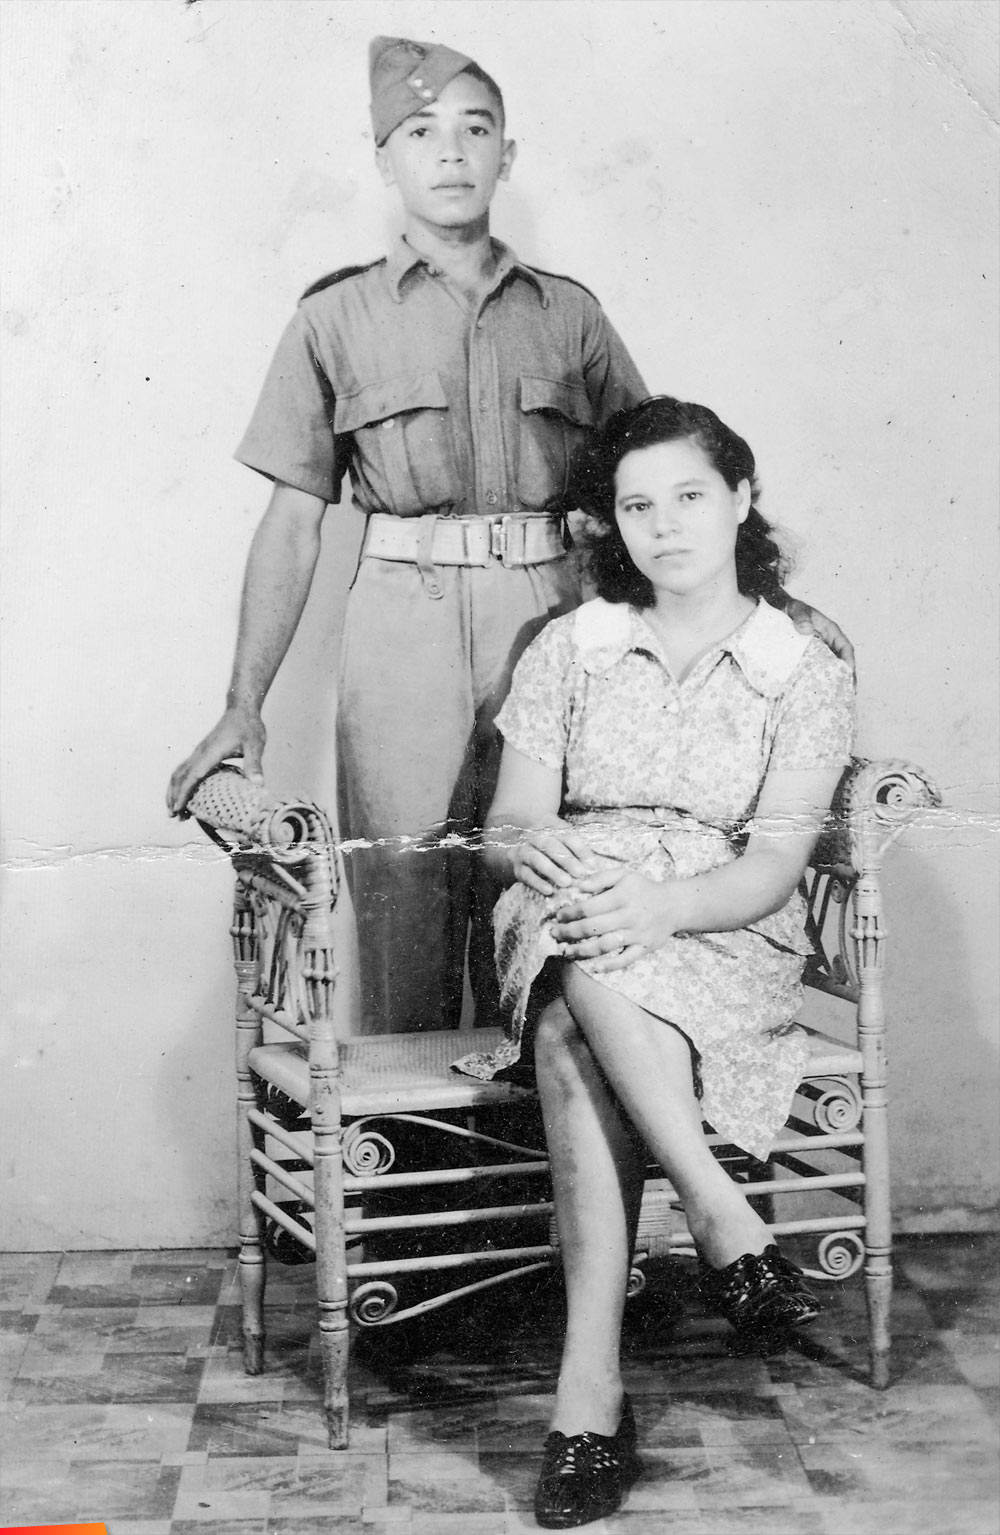 Miss Nils and her husband in his uniform; he was from Honduras